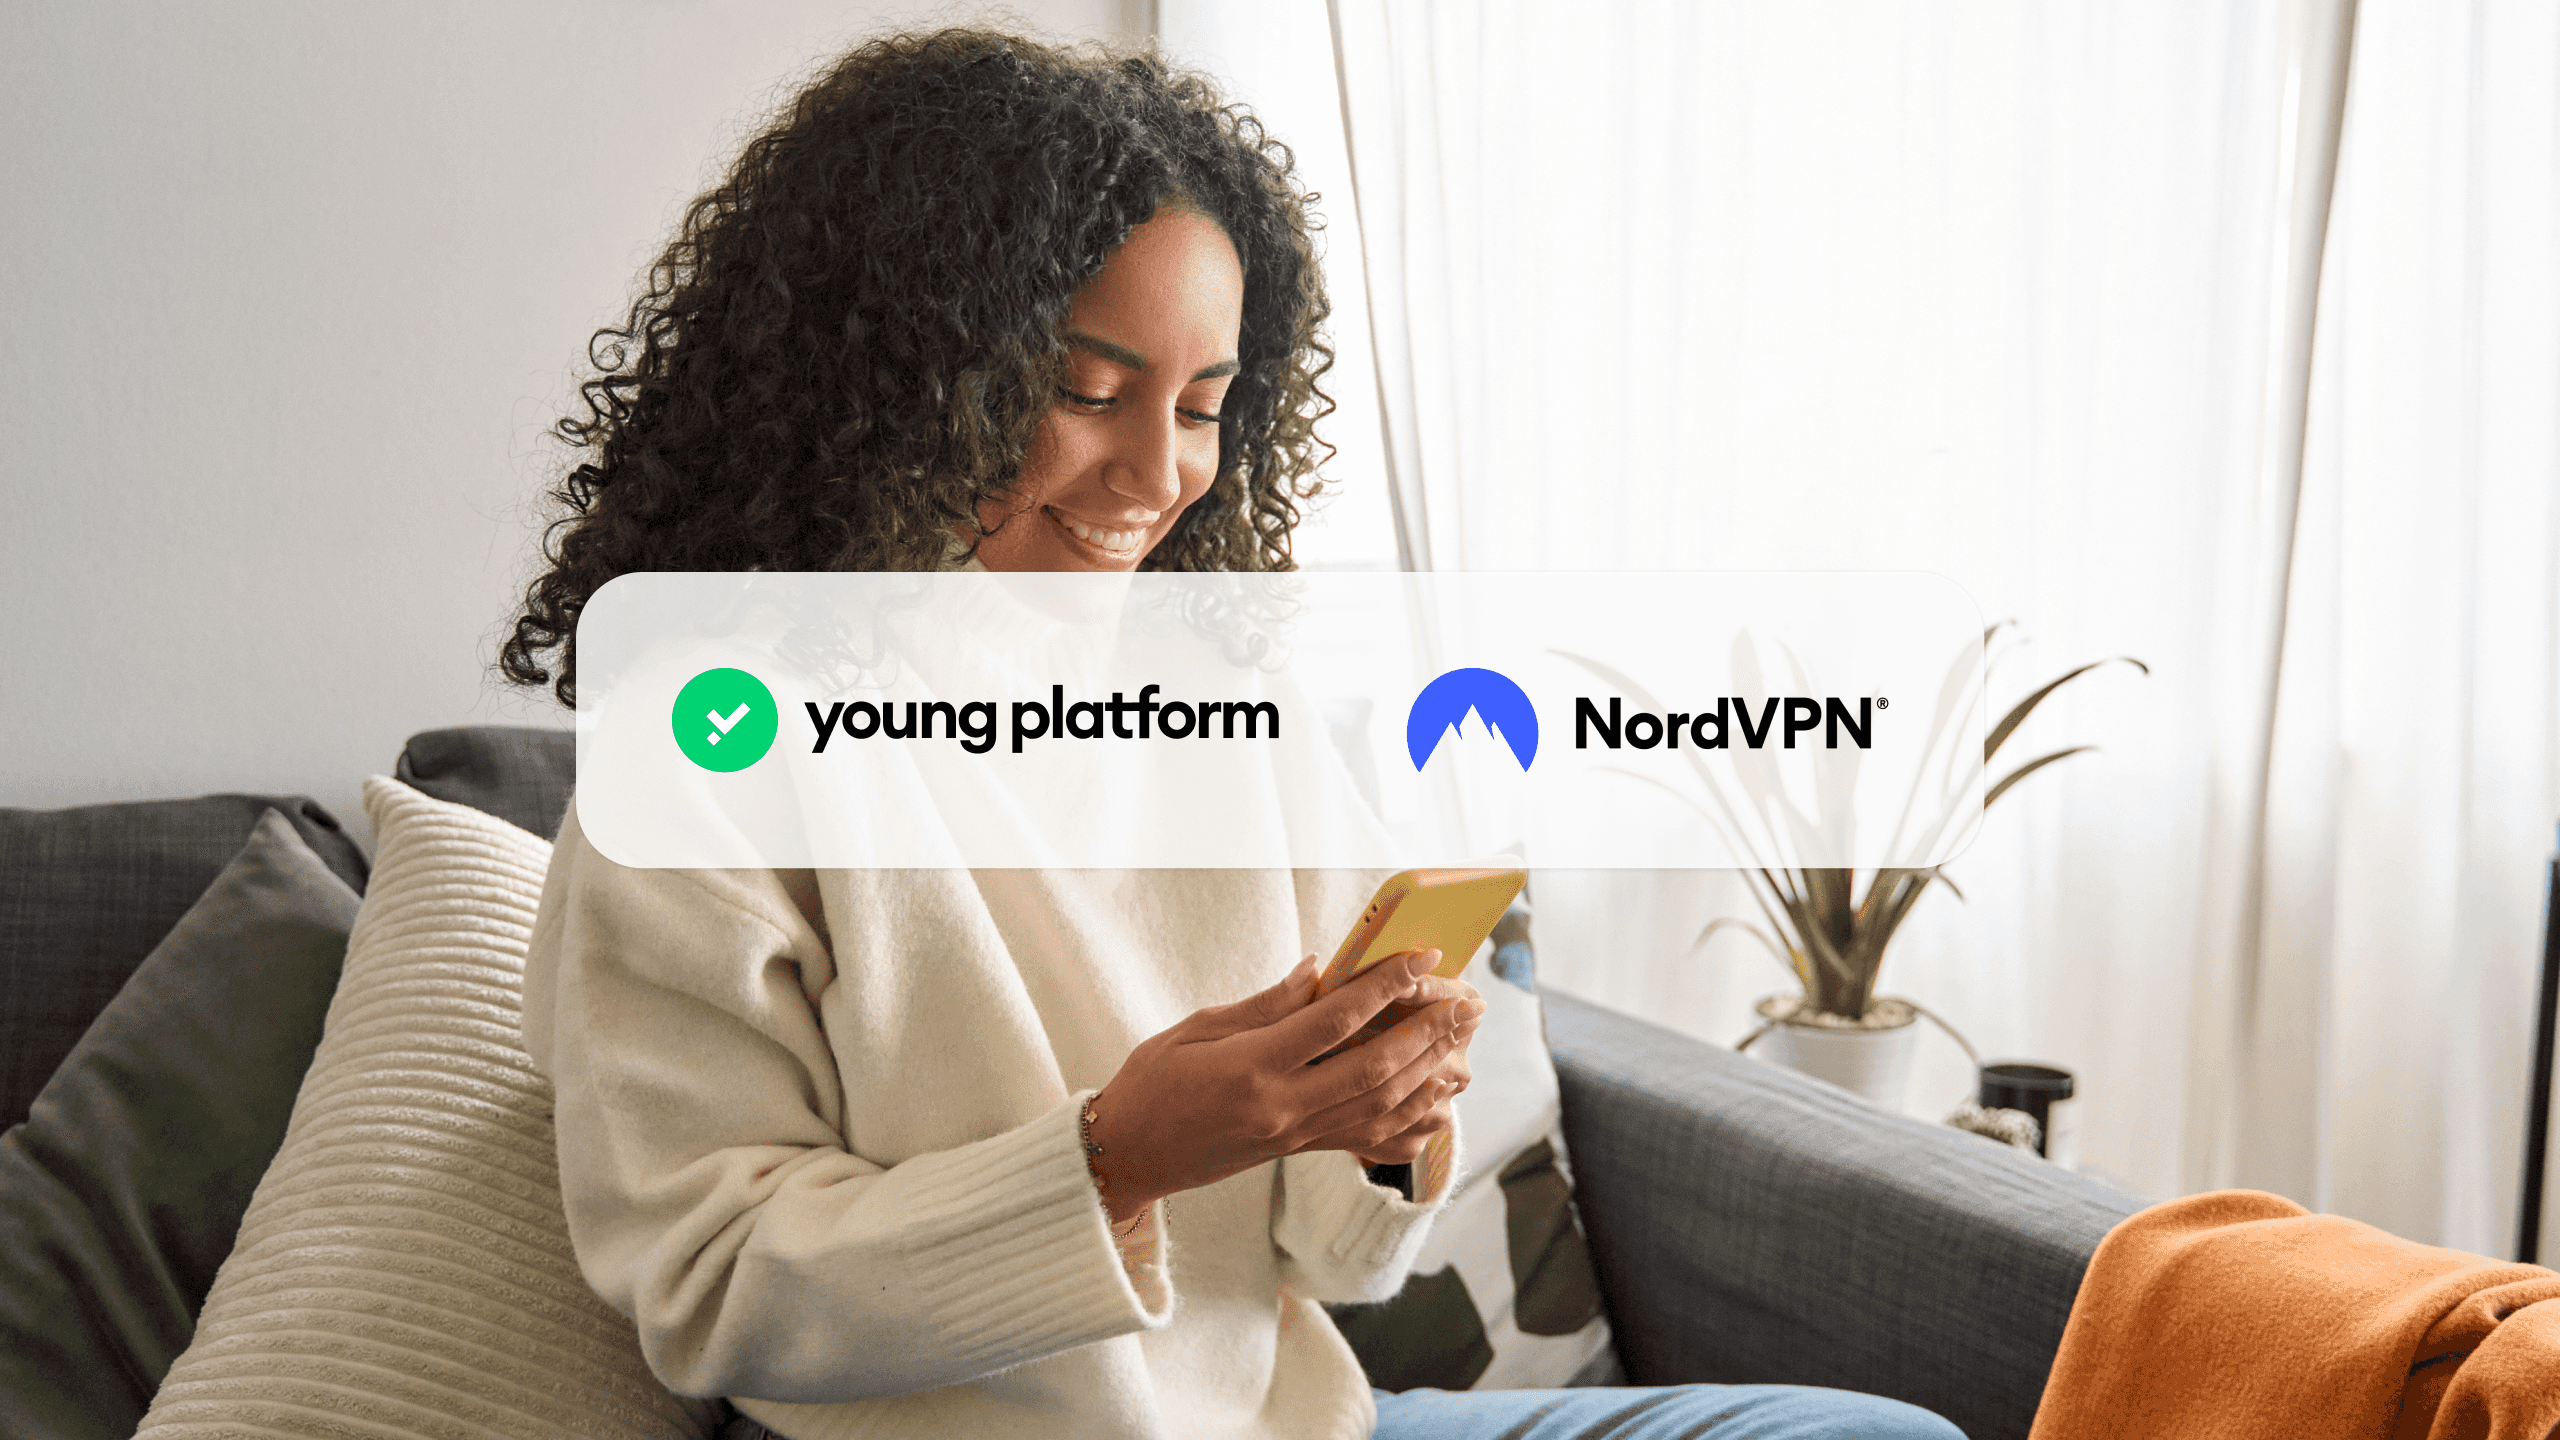 Club Benefit: Get up to 74% discount on NordVPN plans